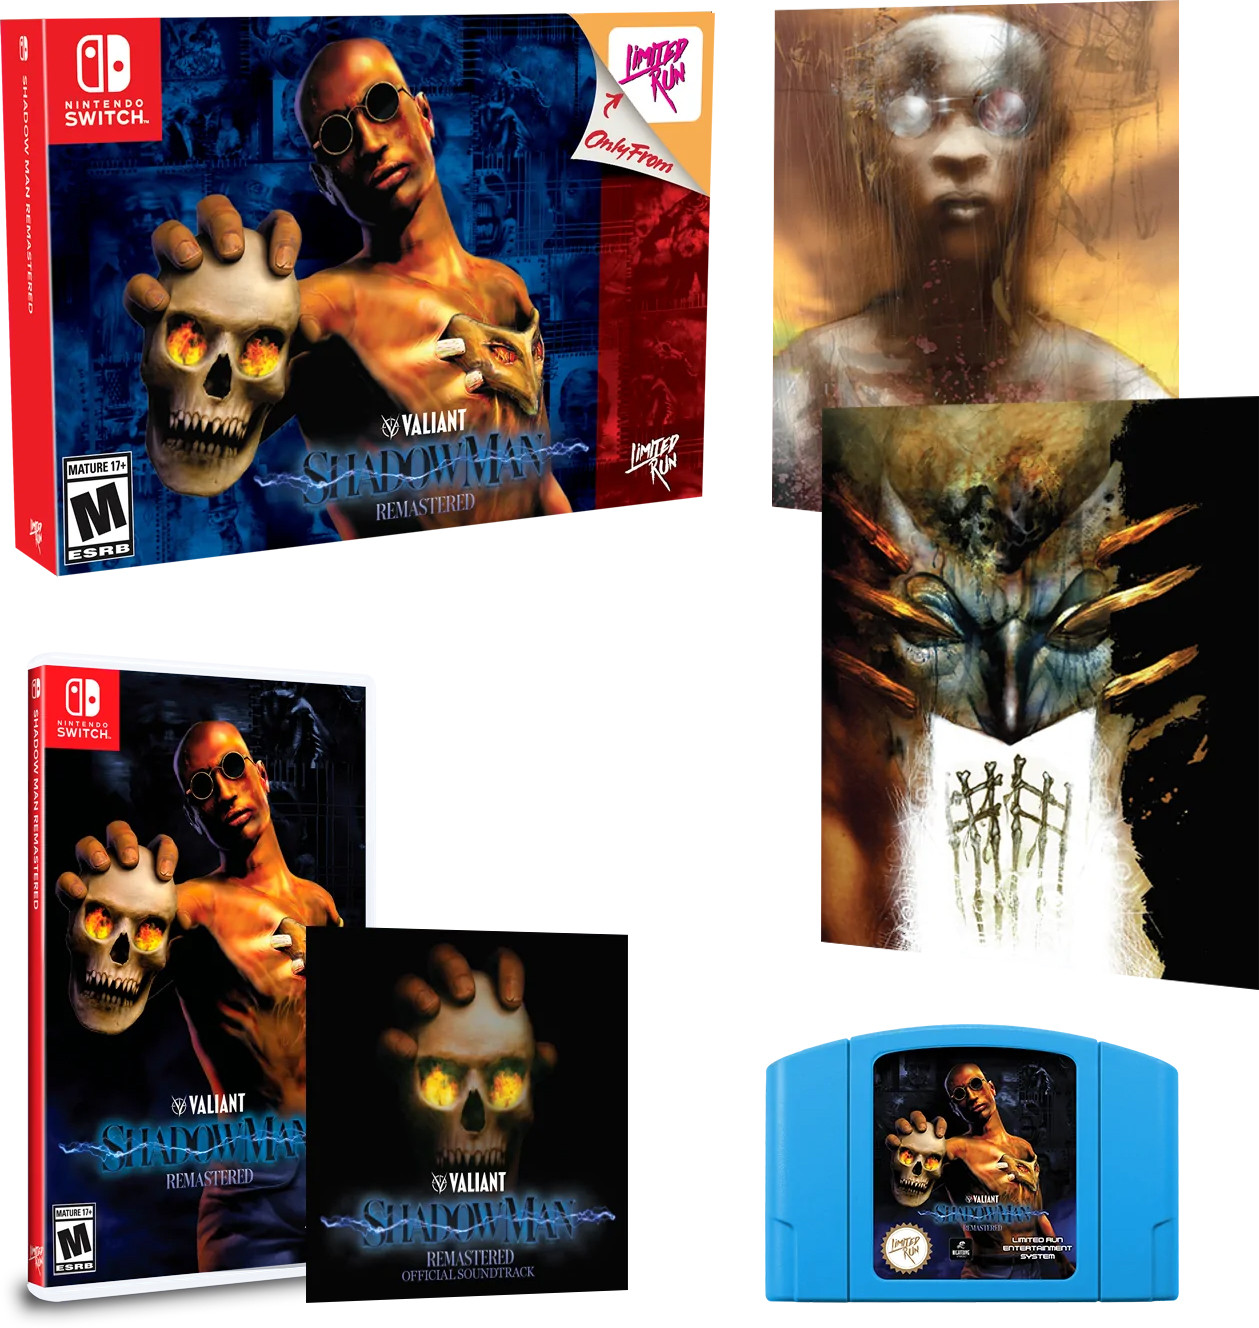 Shadow Man Remastered Classic Edition (Limited Run Games) - Nintendo Switch